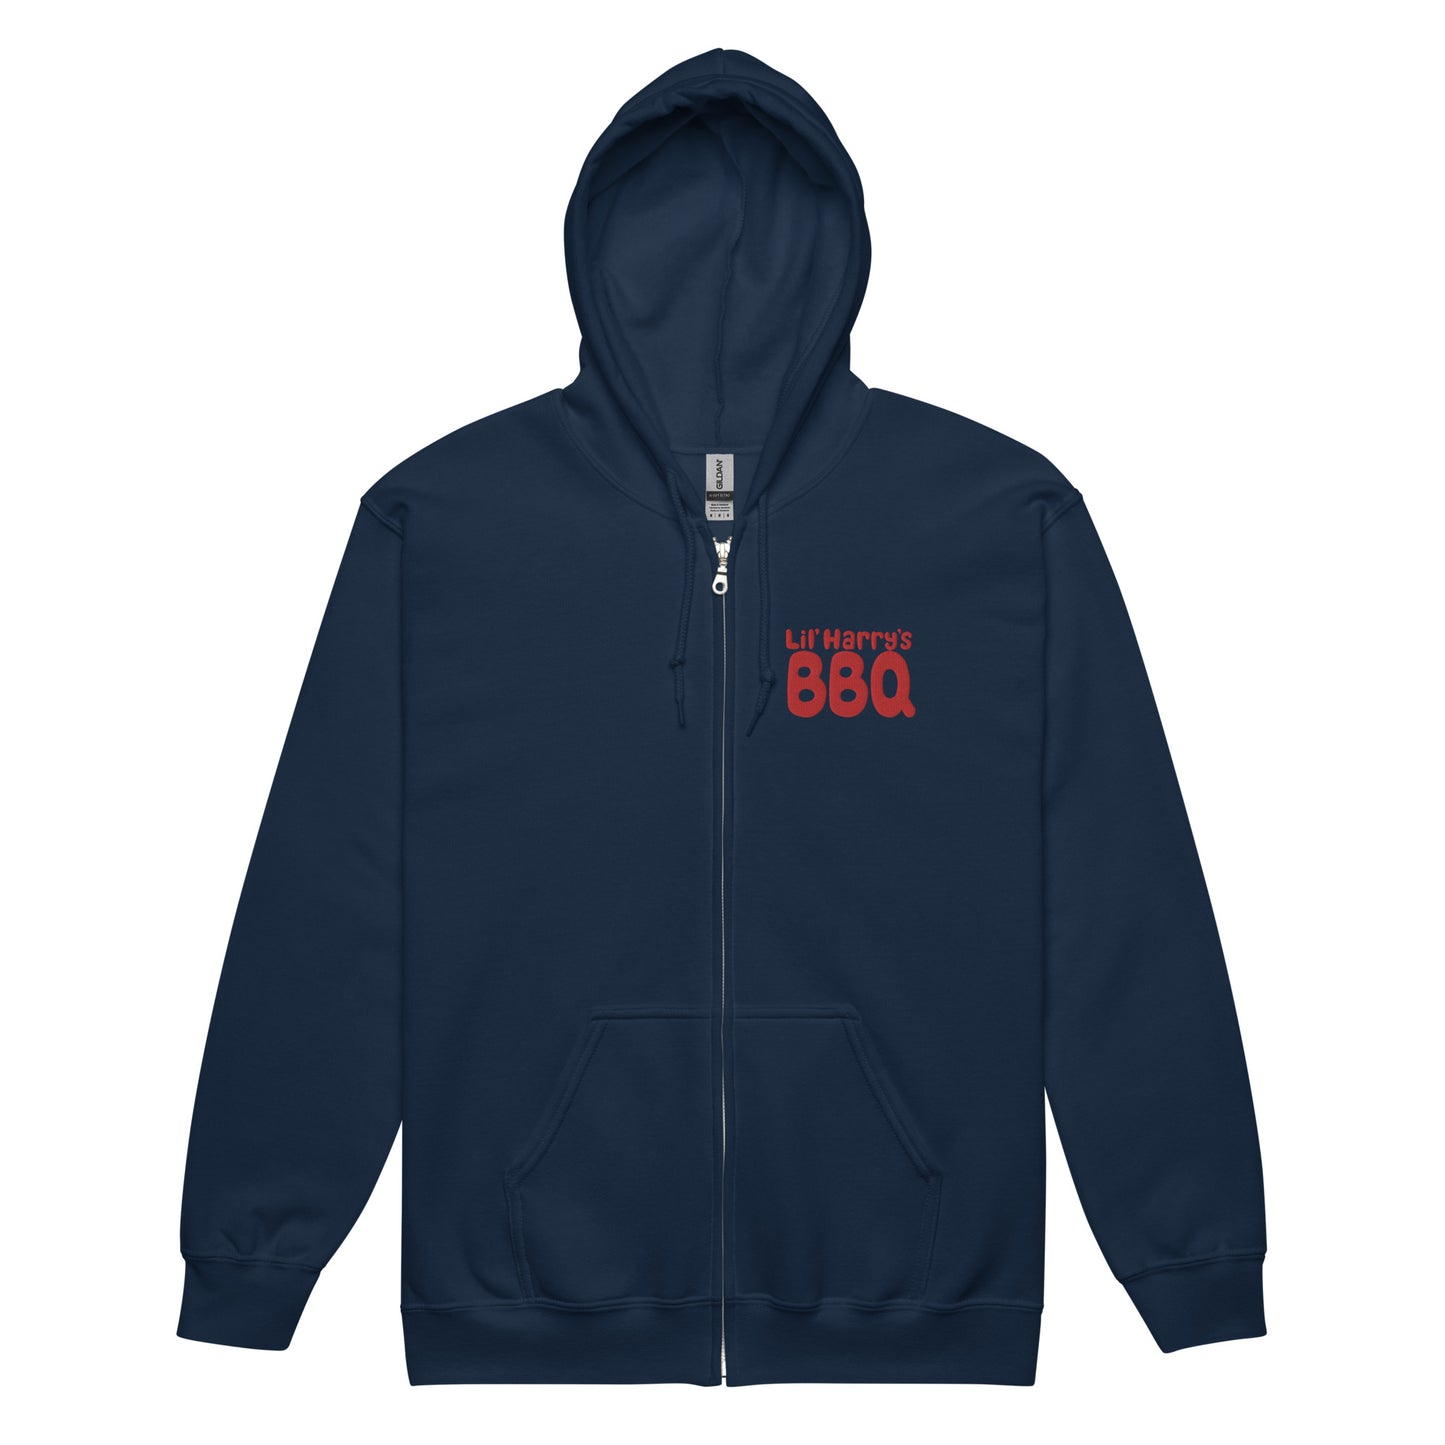 Lil' Harry's BBQ Front Embroidered Unisex Zip Up Hoodie